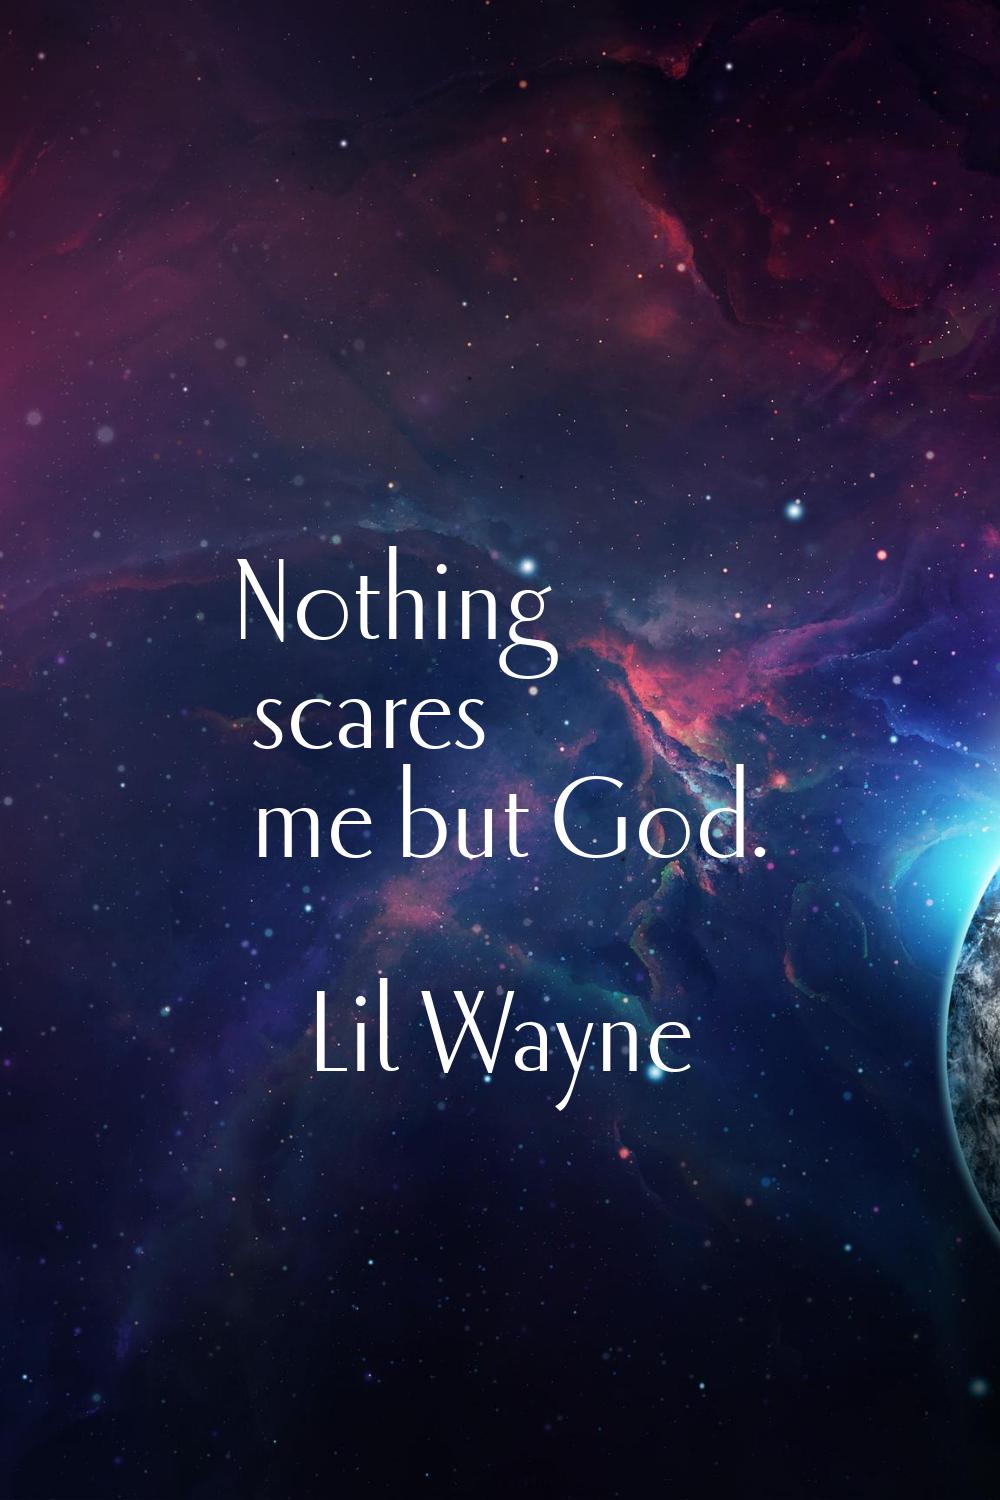 Nothing scares me but God.